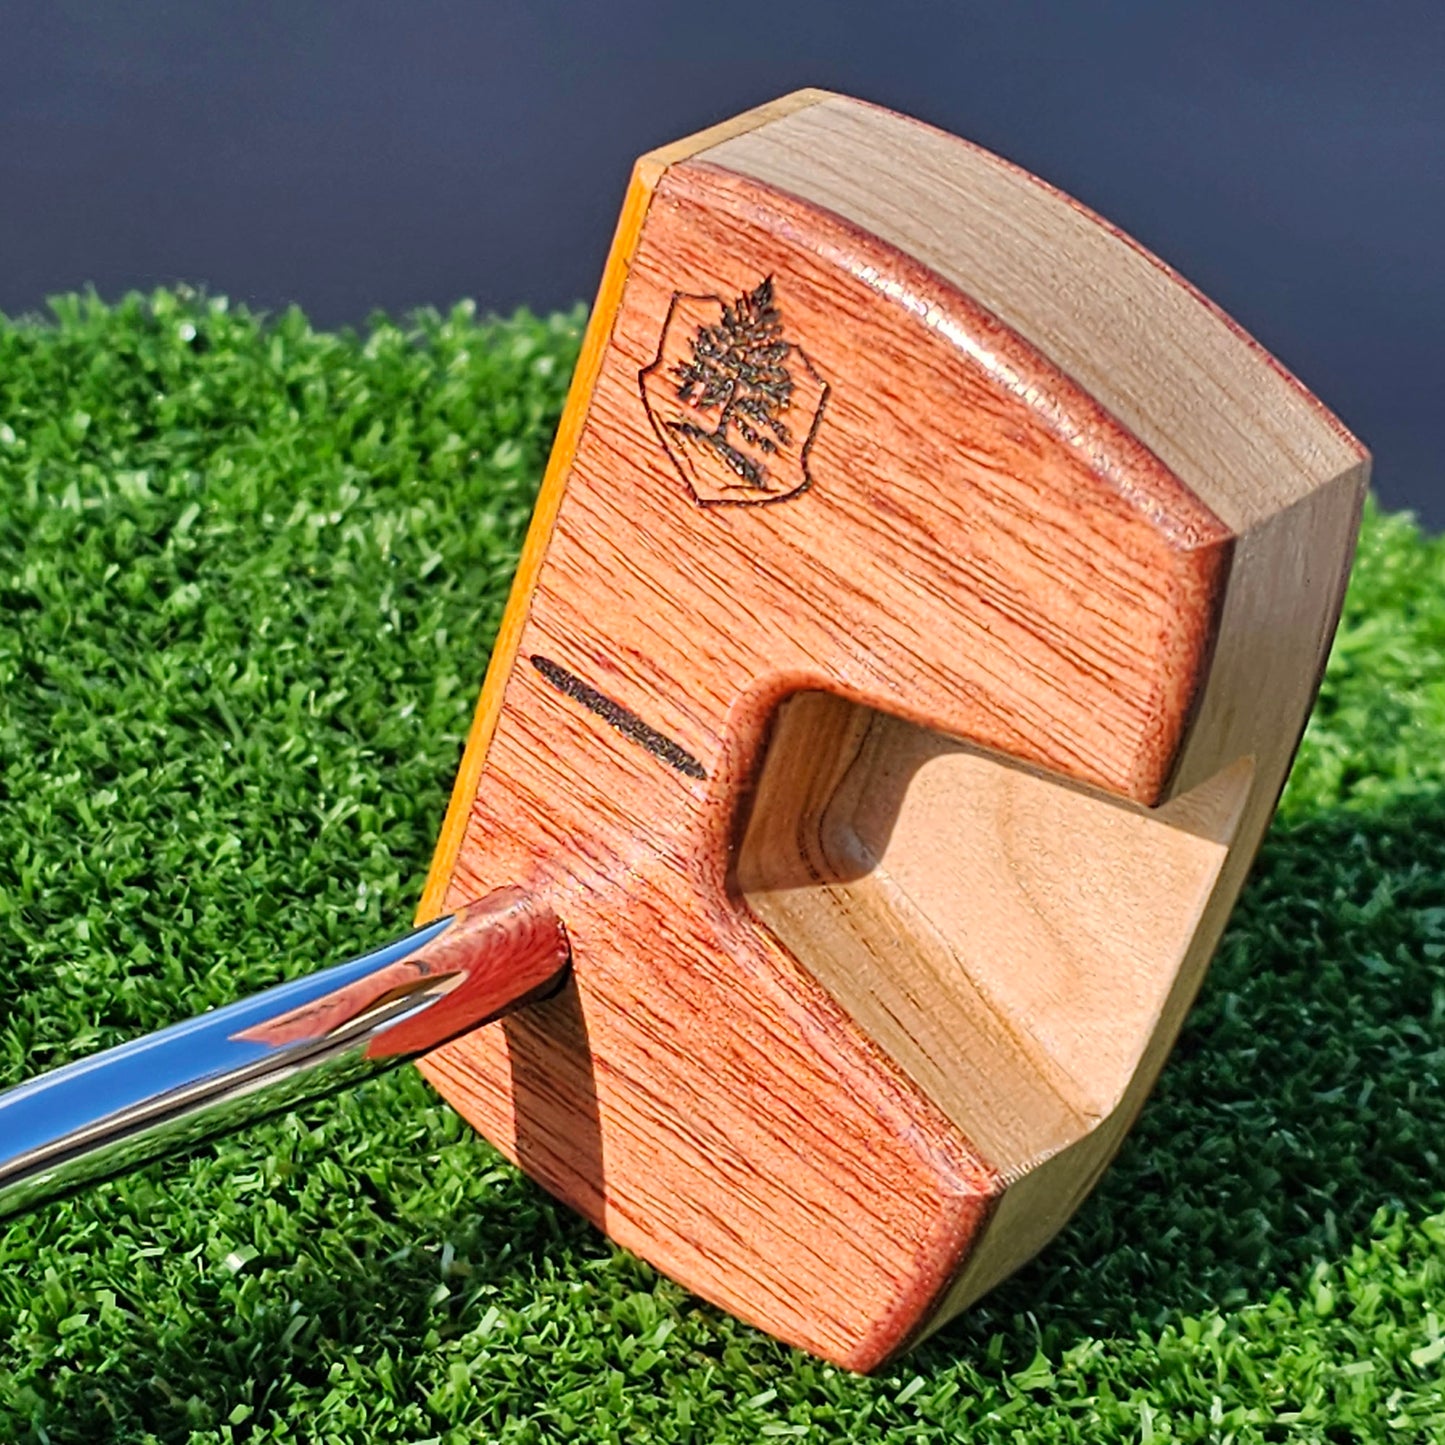 Bloodwood Cherry and Chakte Viga face Woodrich Regal wood putter